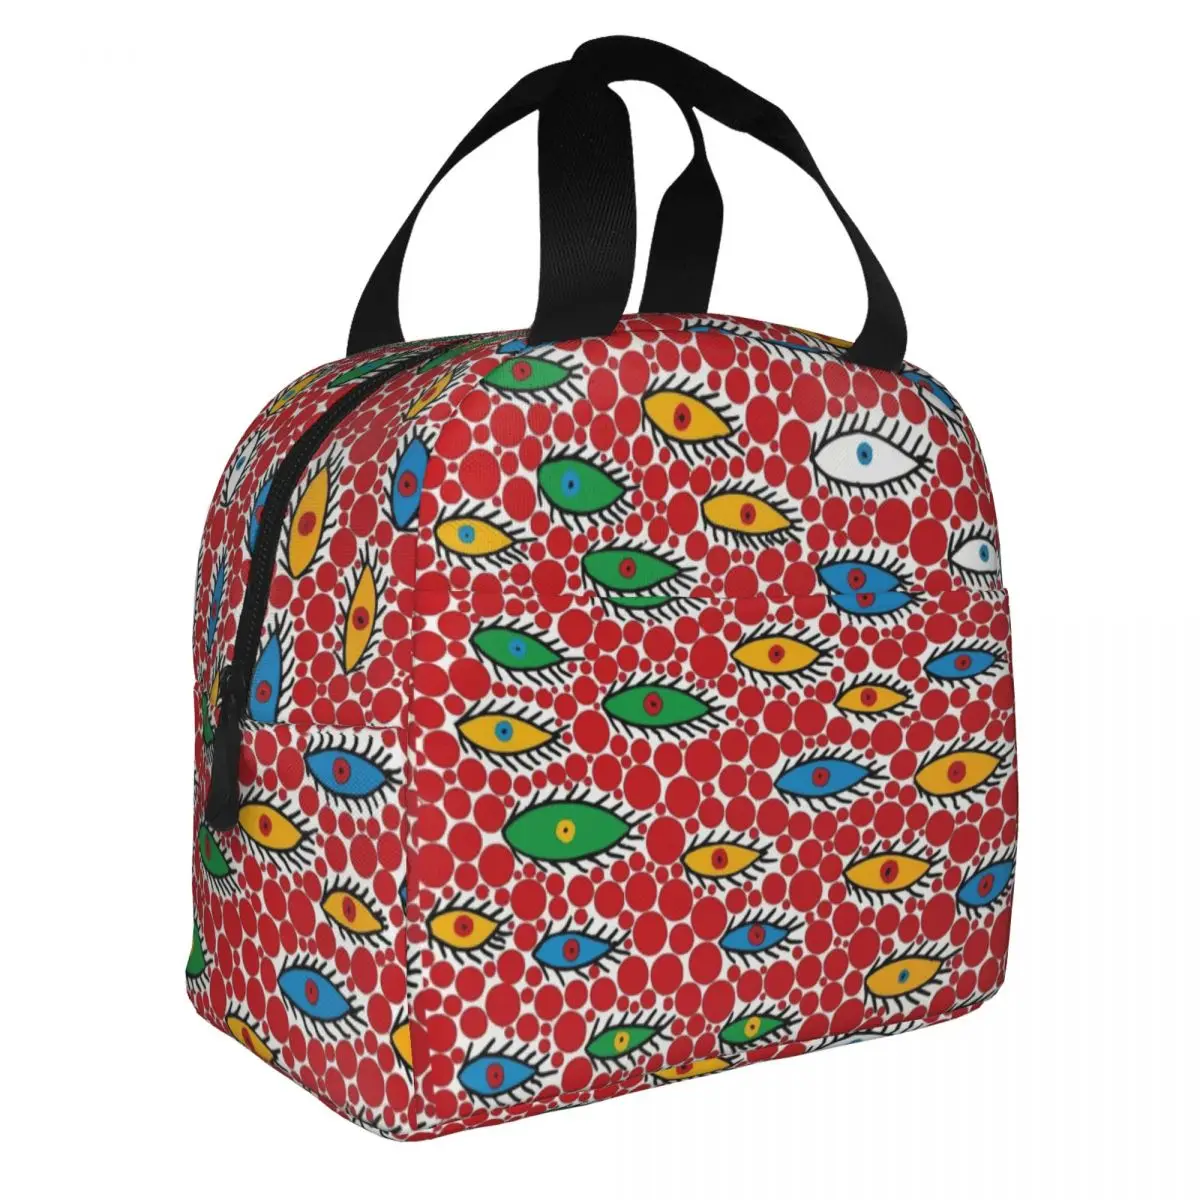 

Yayoi Kusama Flaying Eyes Insulated Lunch Bag Large Polka Aesthetic Meal Container Thermal Bag Tote Lunch Box Work Travel